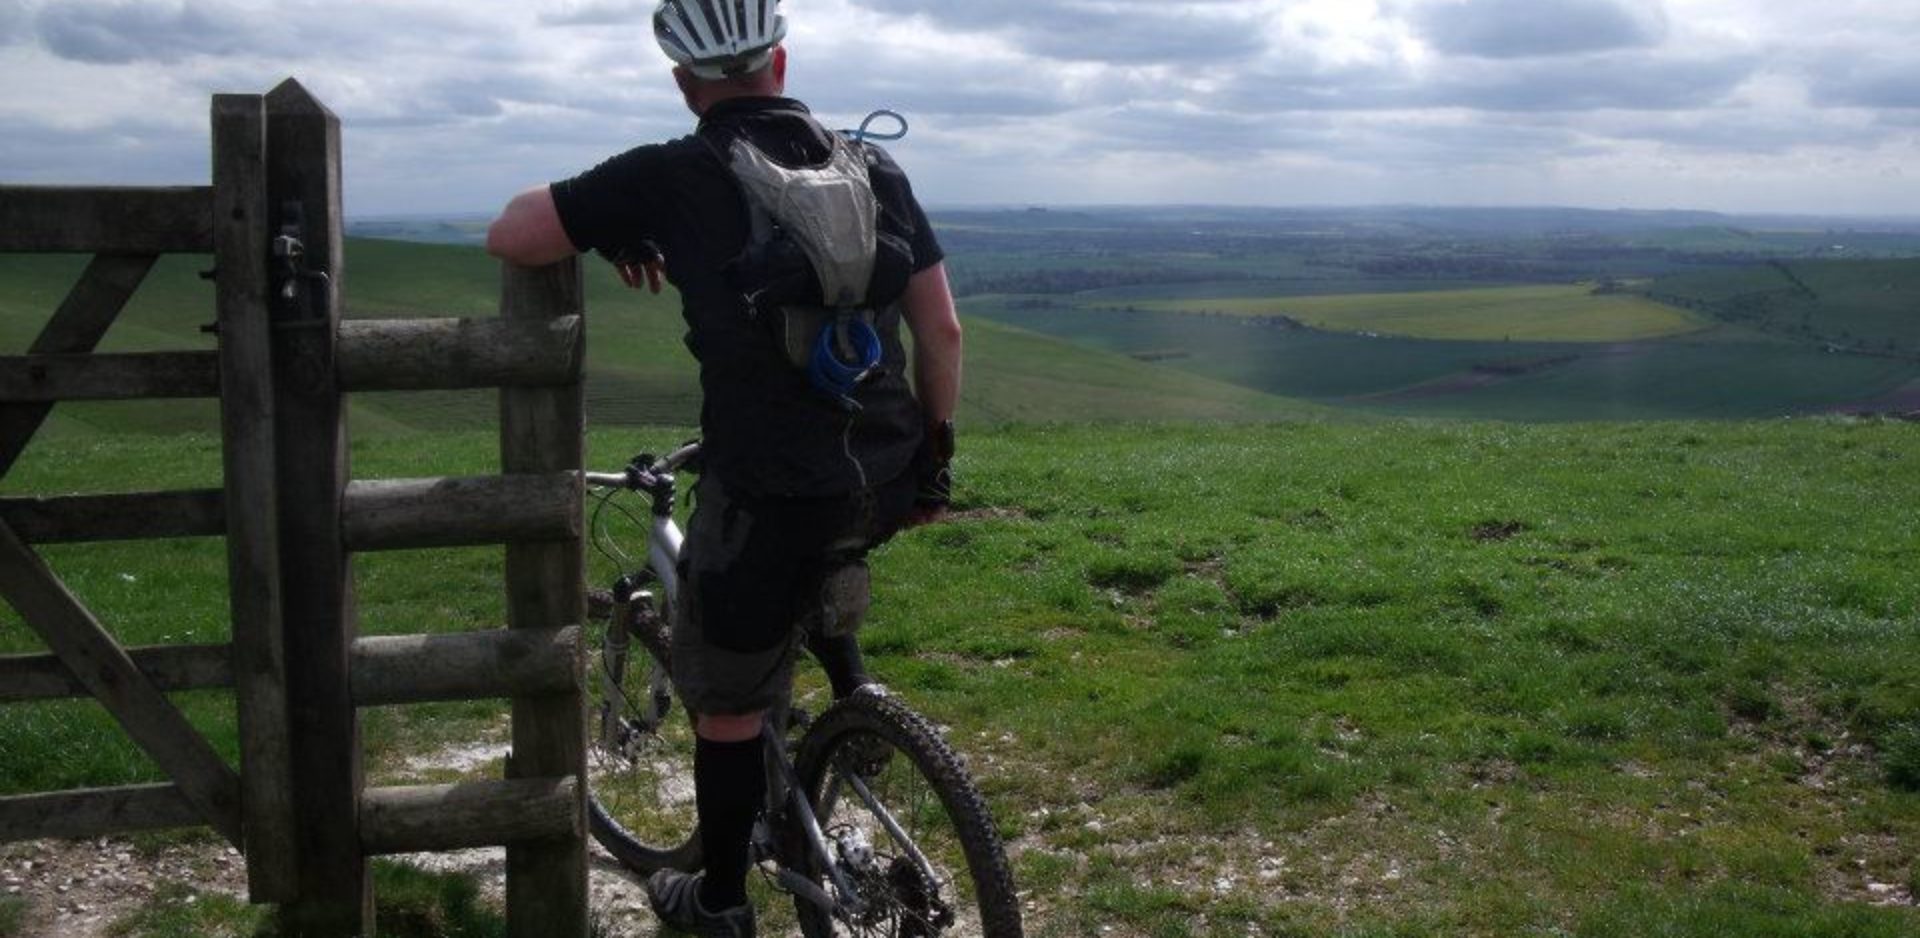 Cyclist overlooking Pewsey Vale